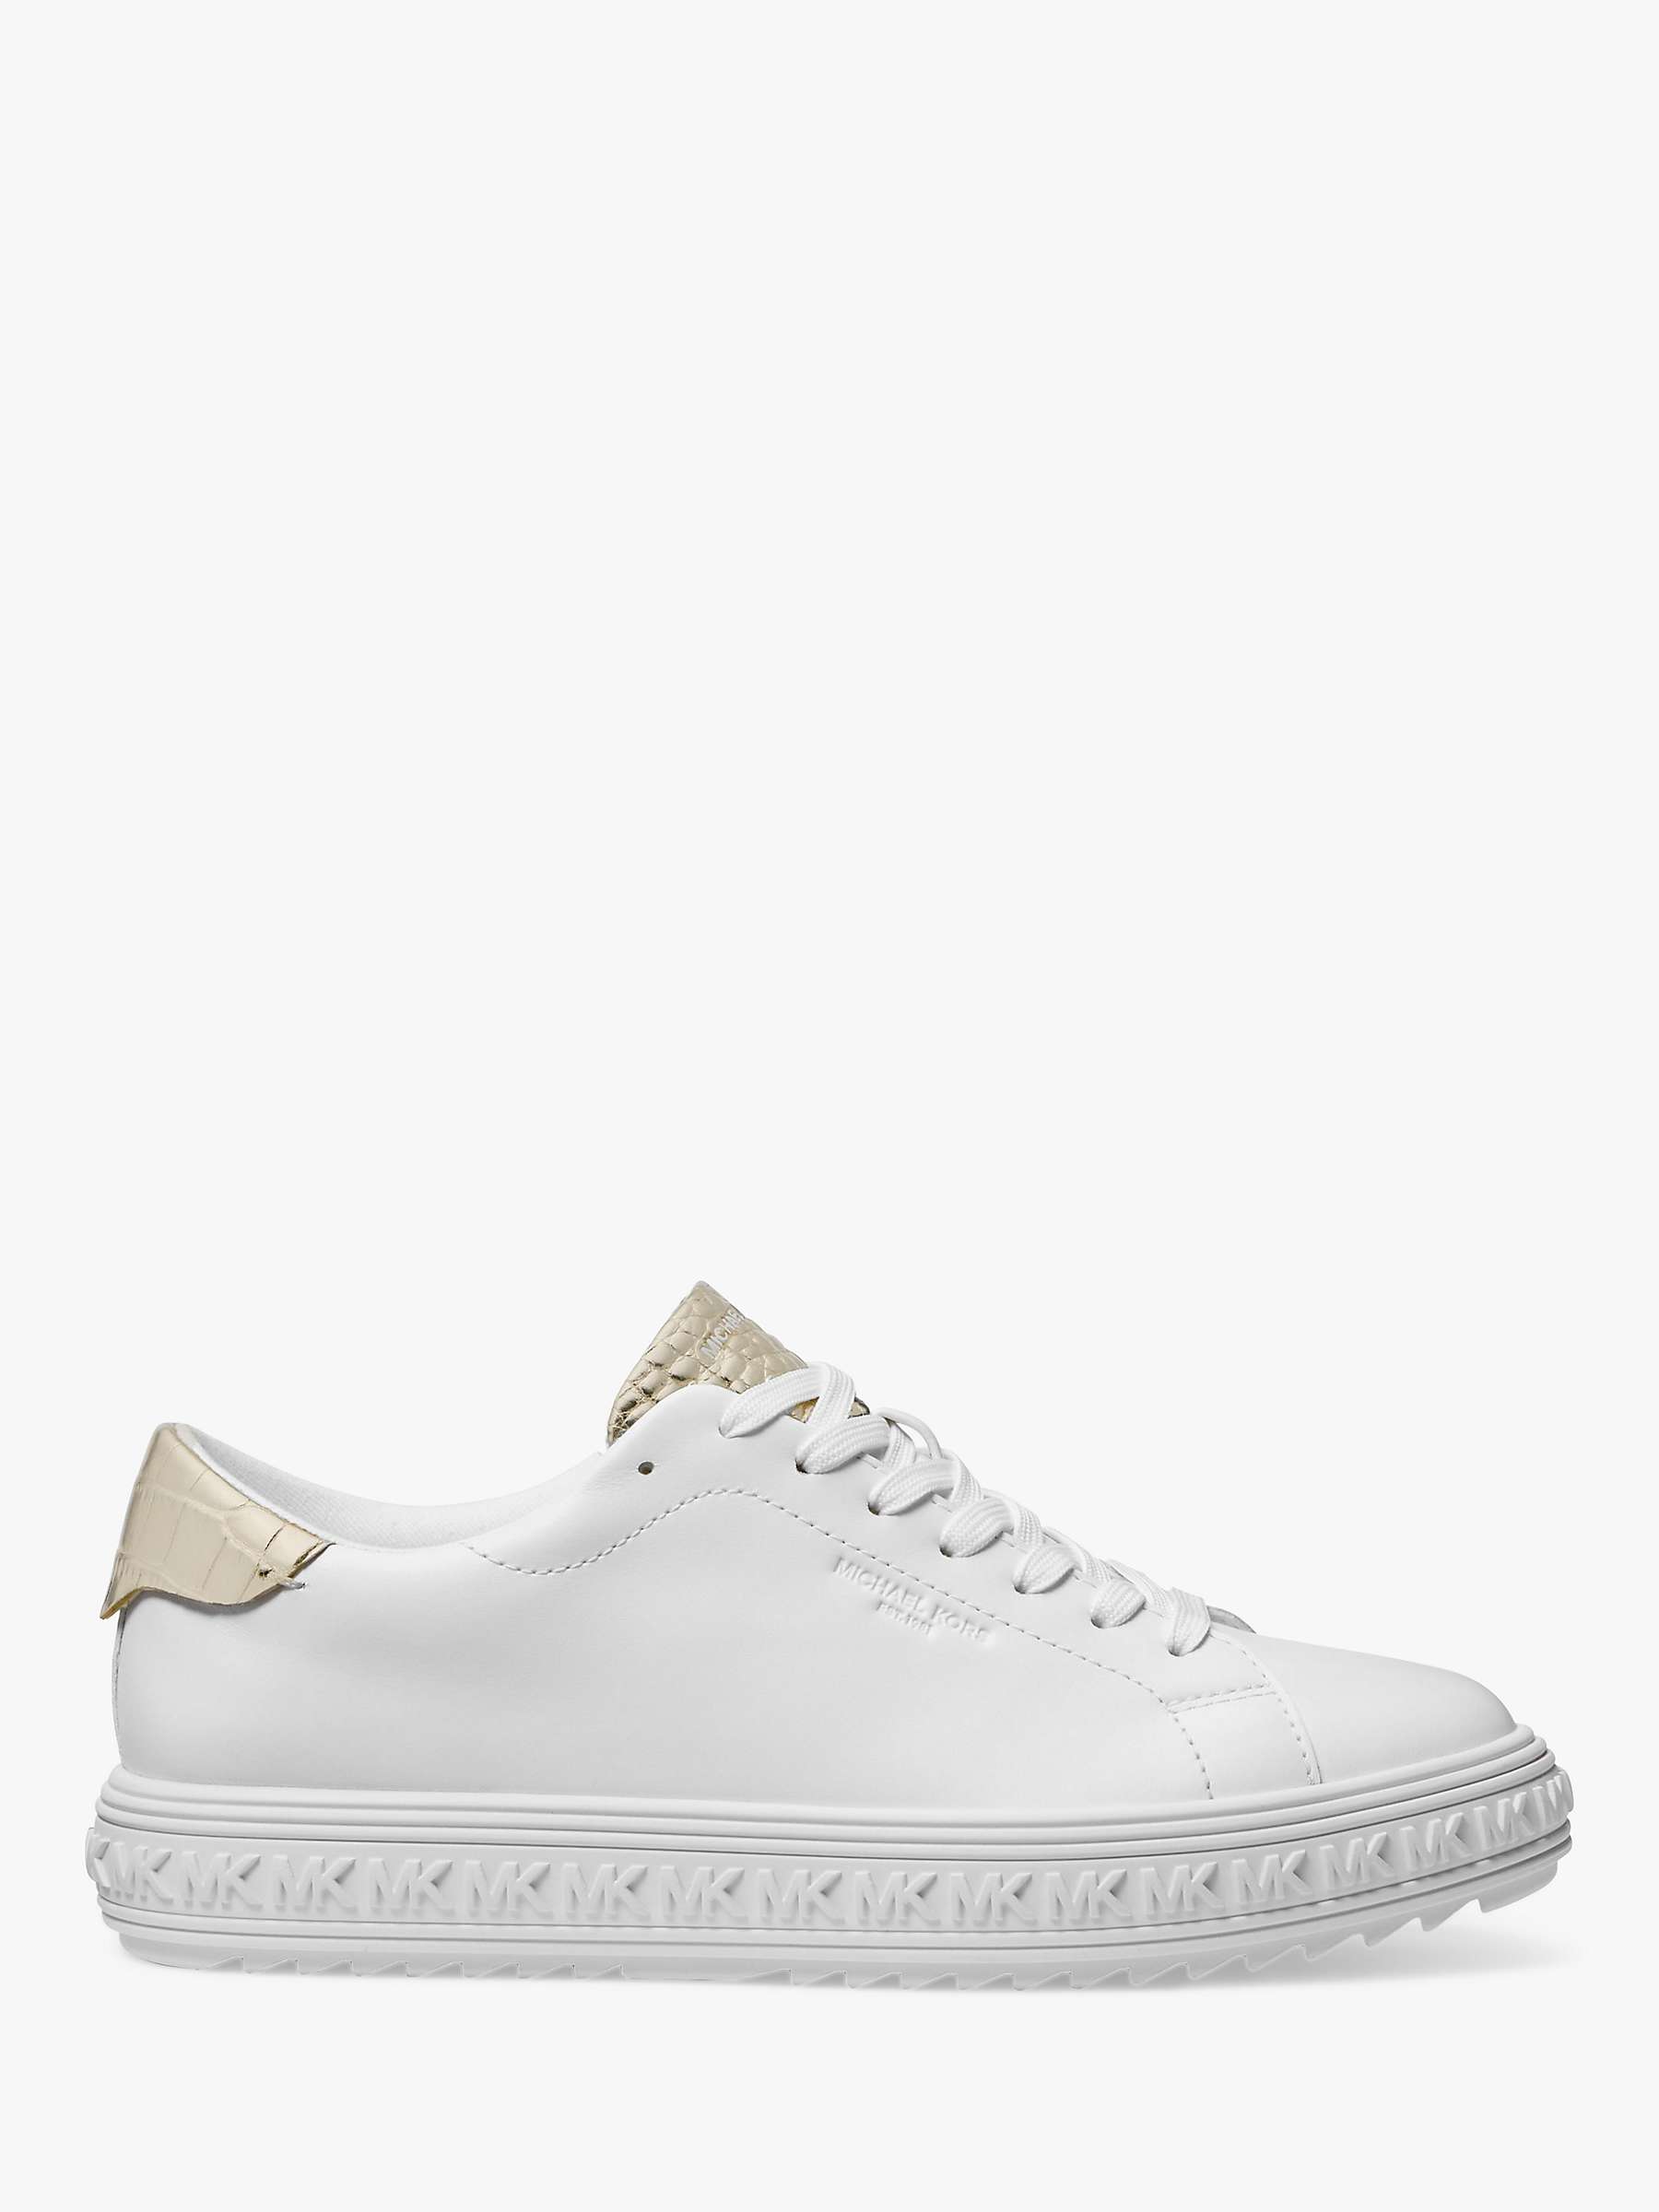 Buy MICHAEL Michael Kors Grove Leather Lace Trainers, White/Pale Gold Online at johnlewis.com